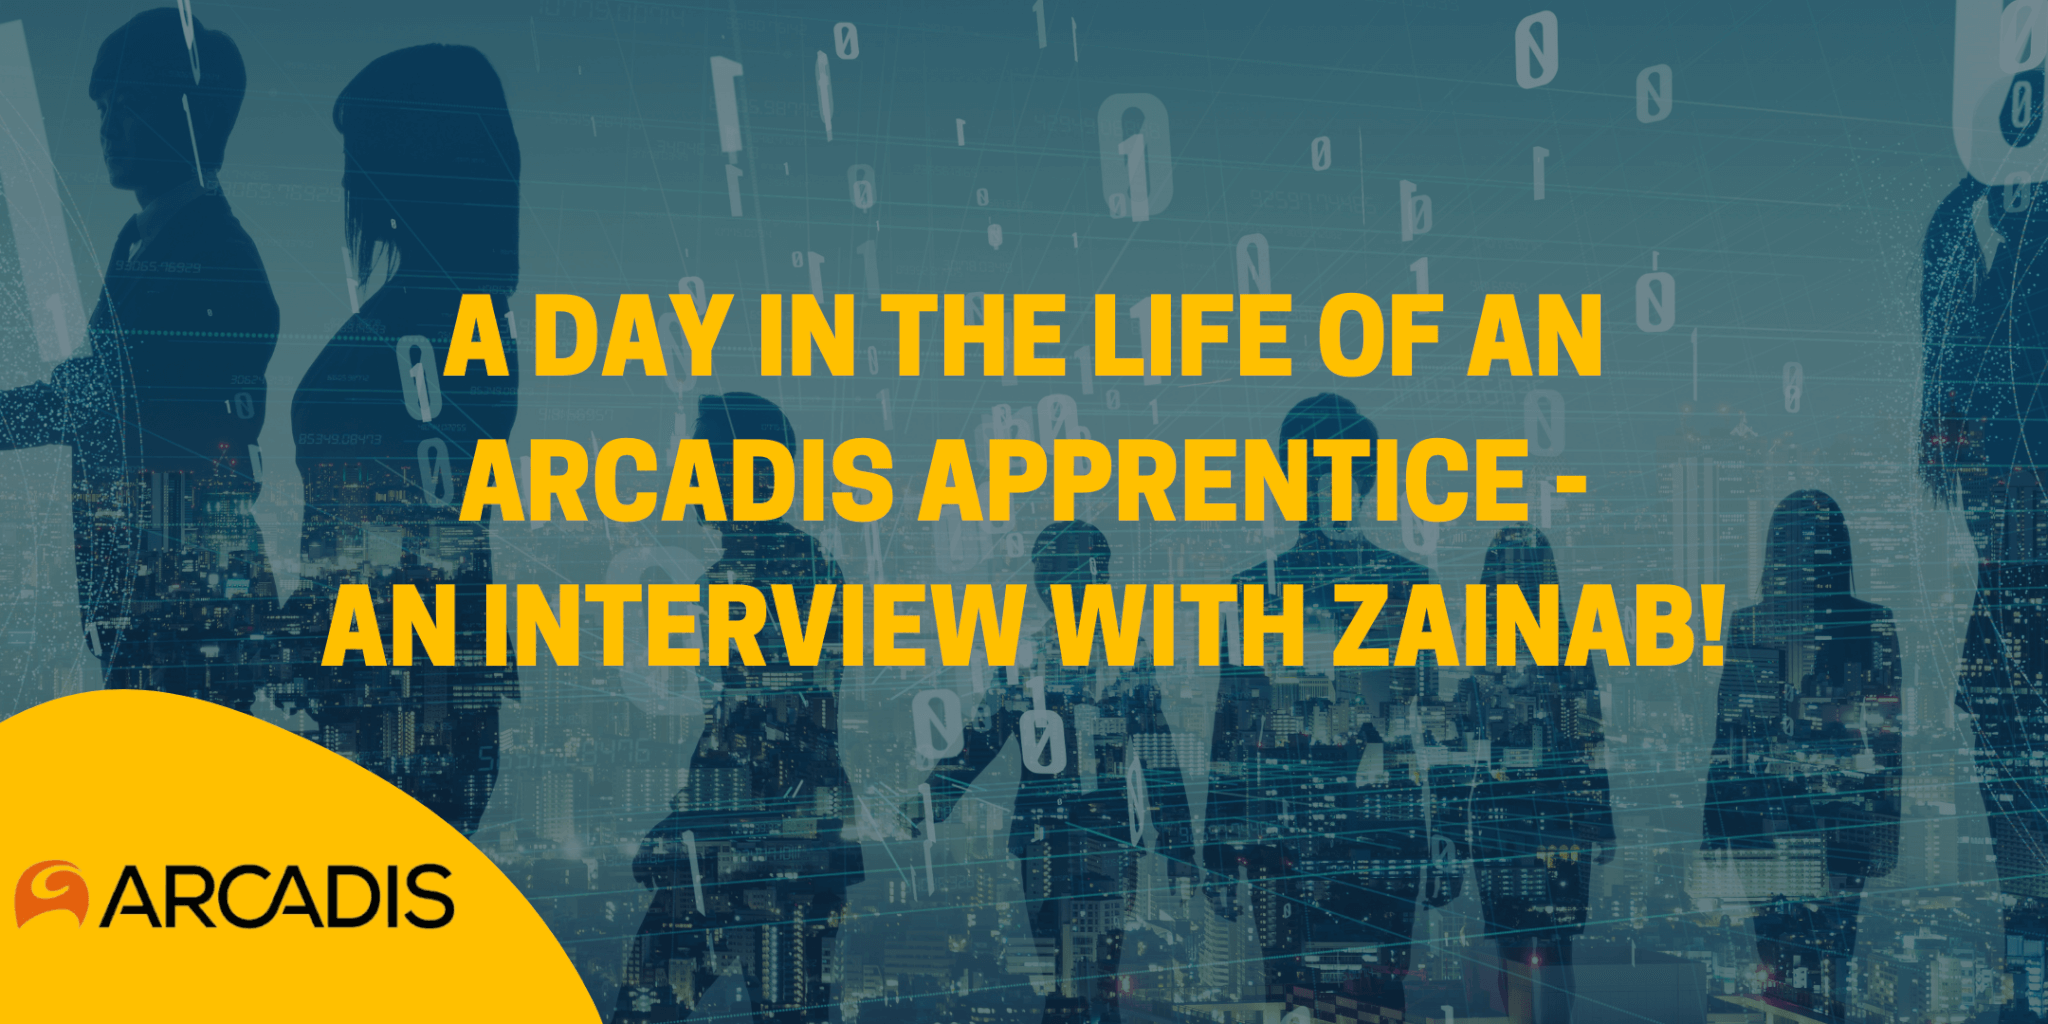 Day in the life of an Arcadis Apprentice!